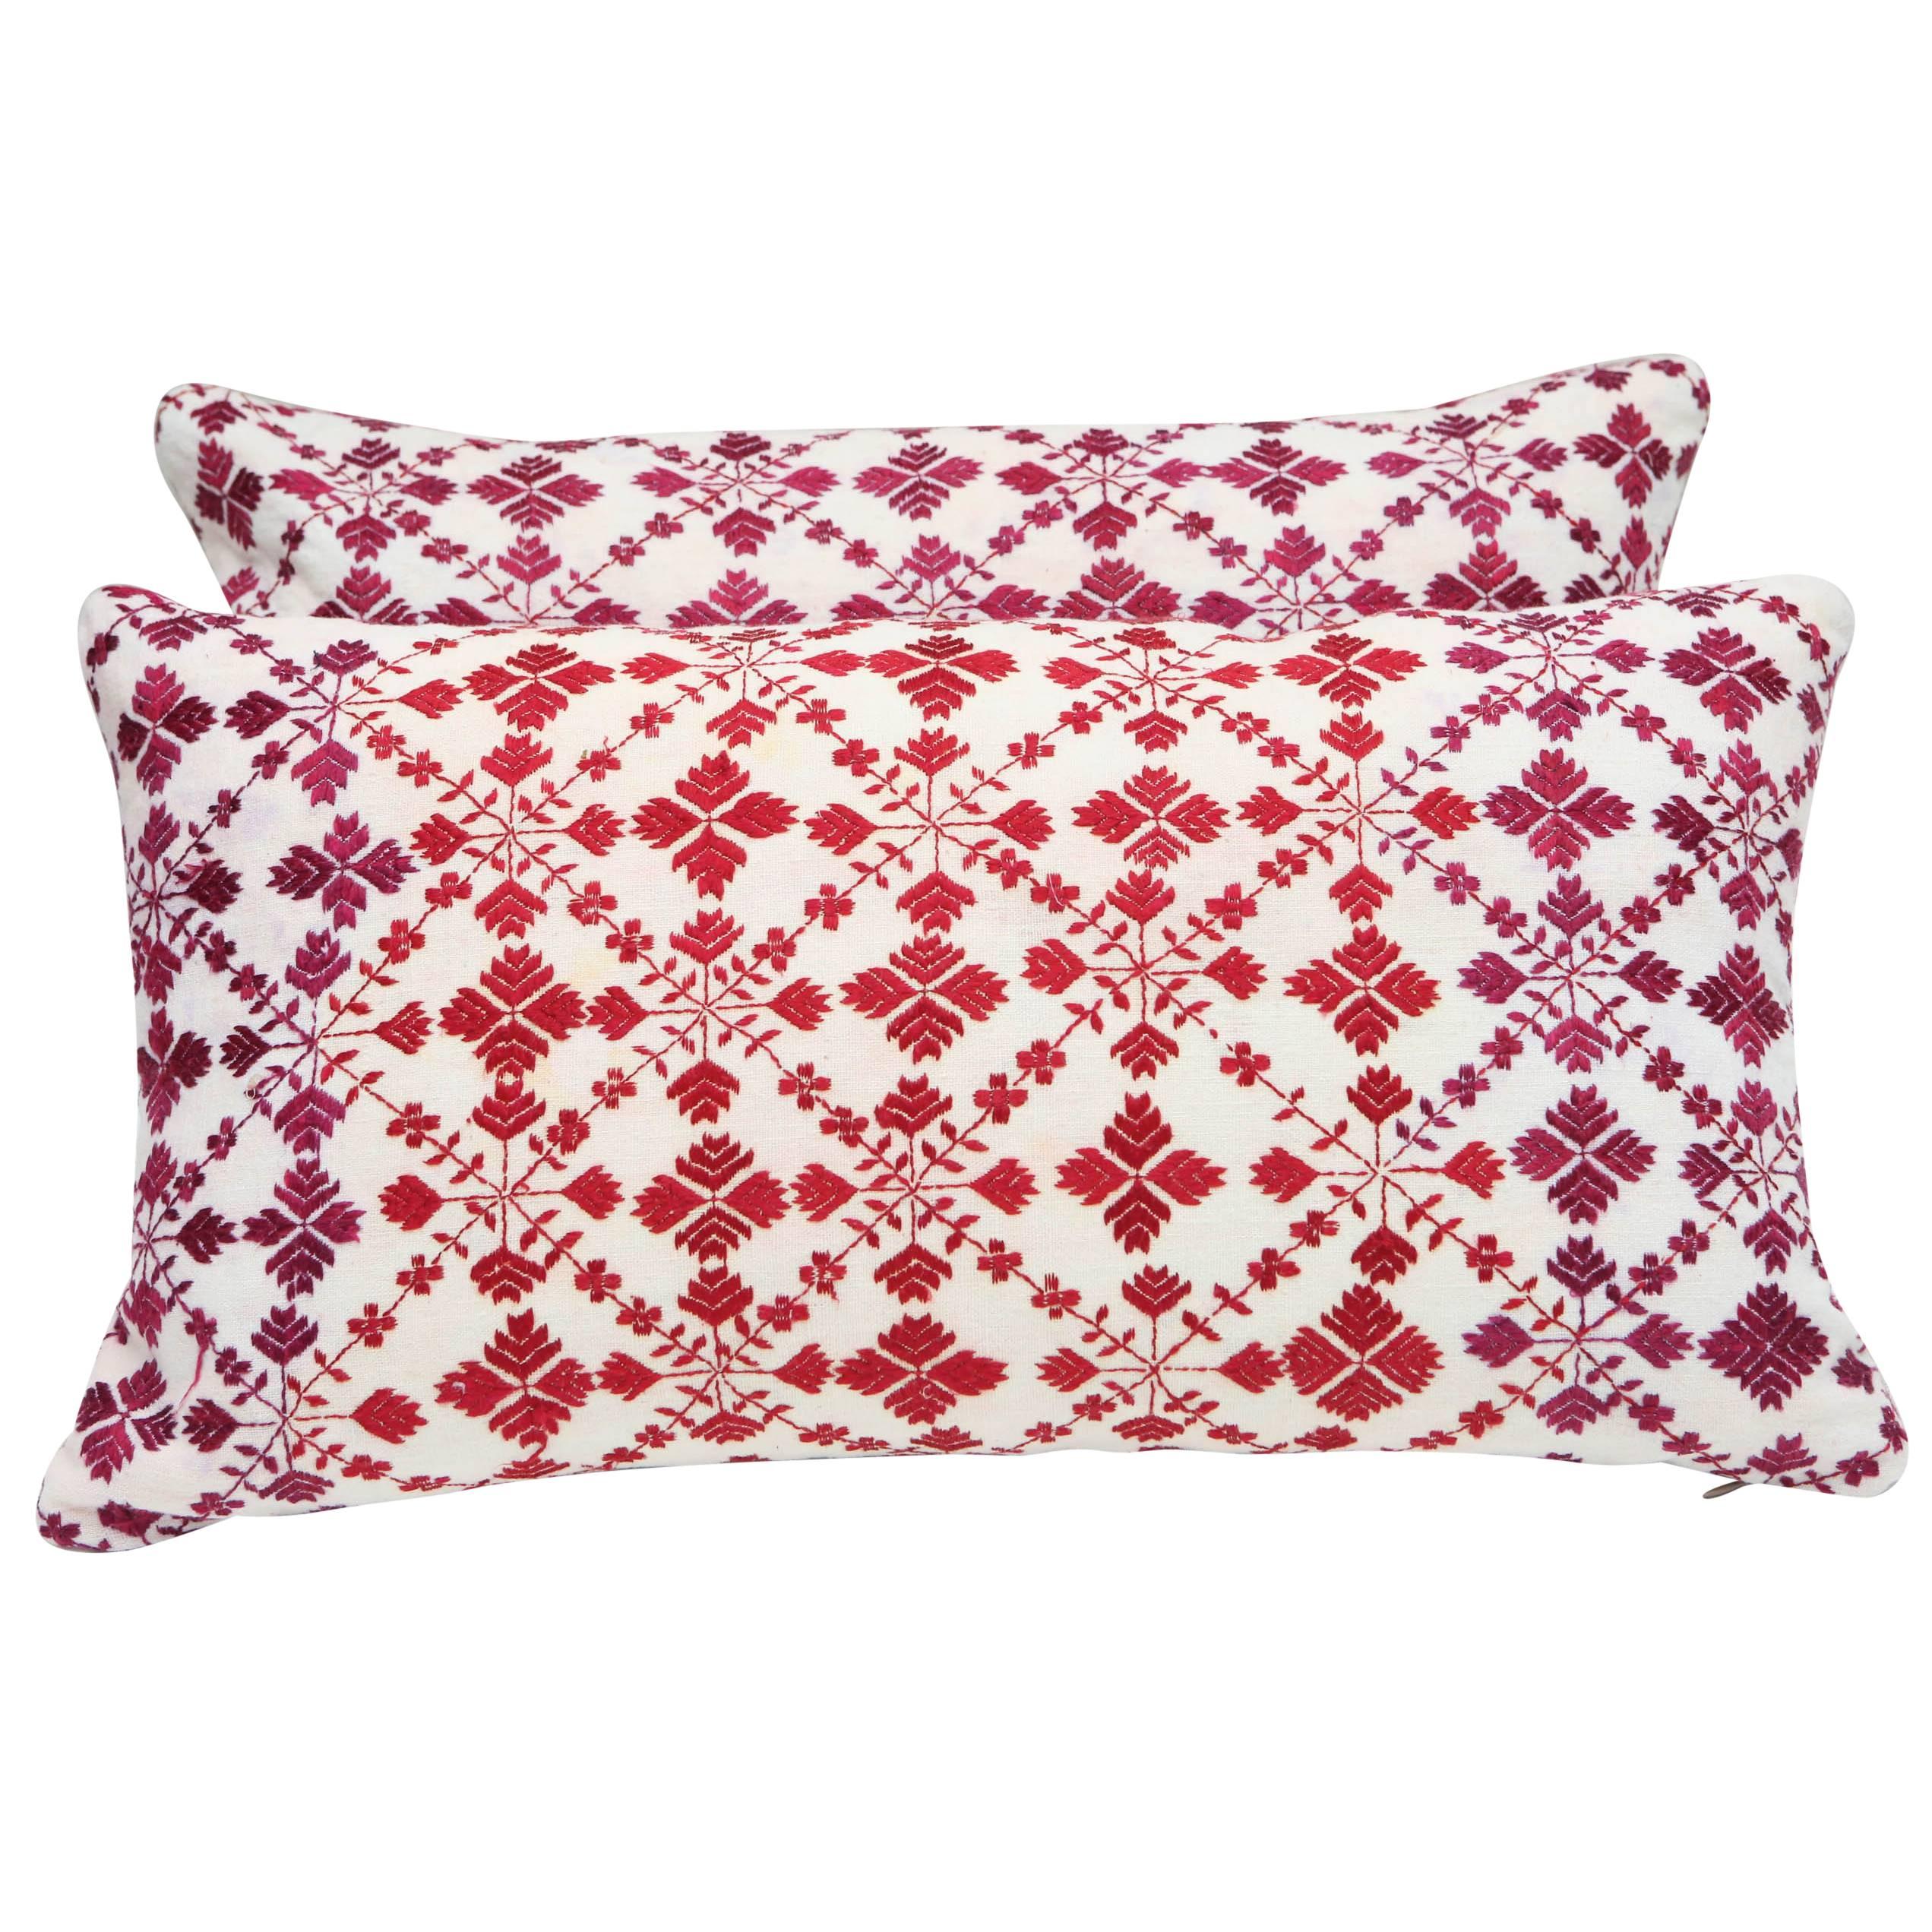 Swat Valley Embroidery Pillows 12 x 23  For Sale